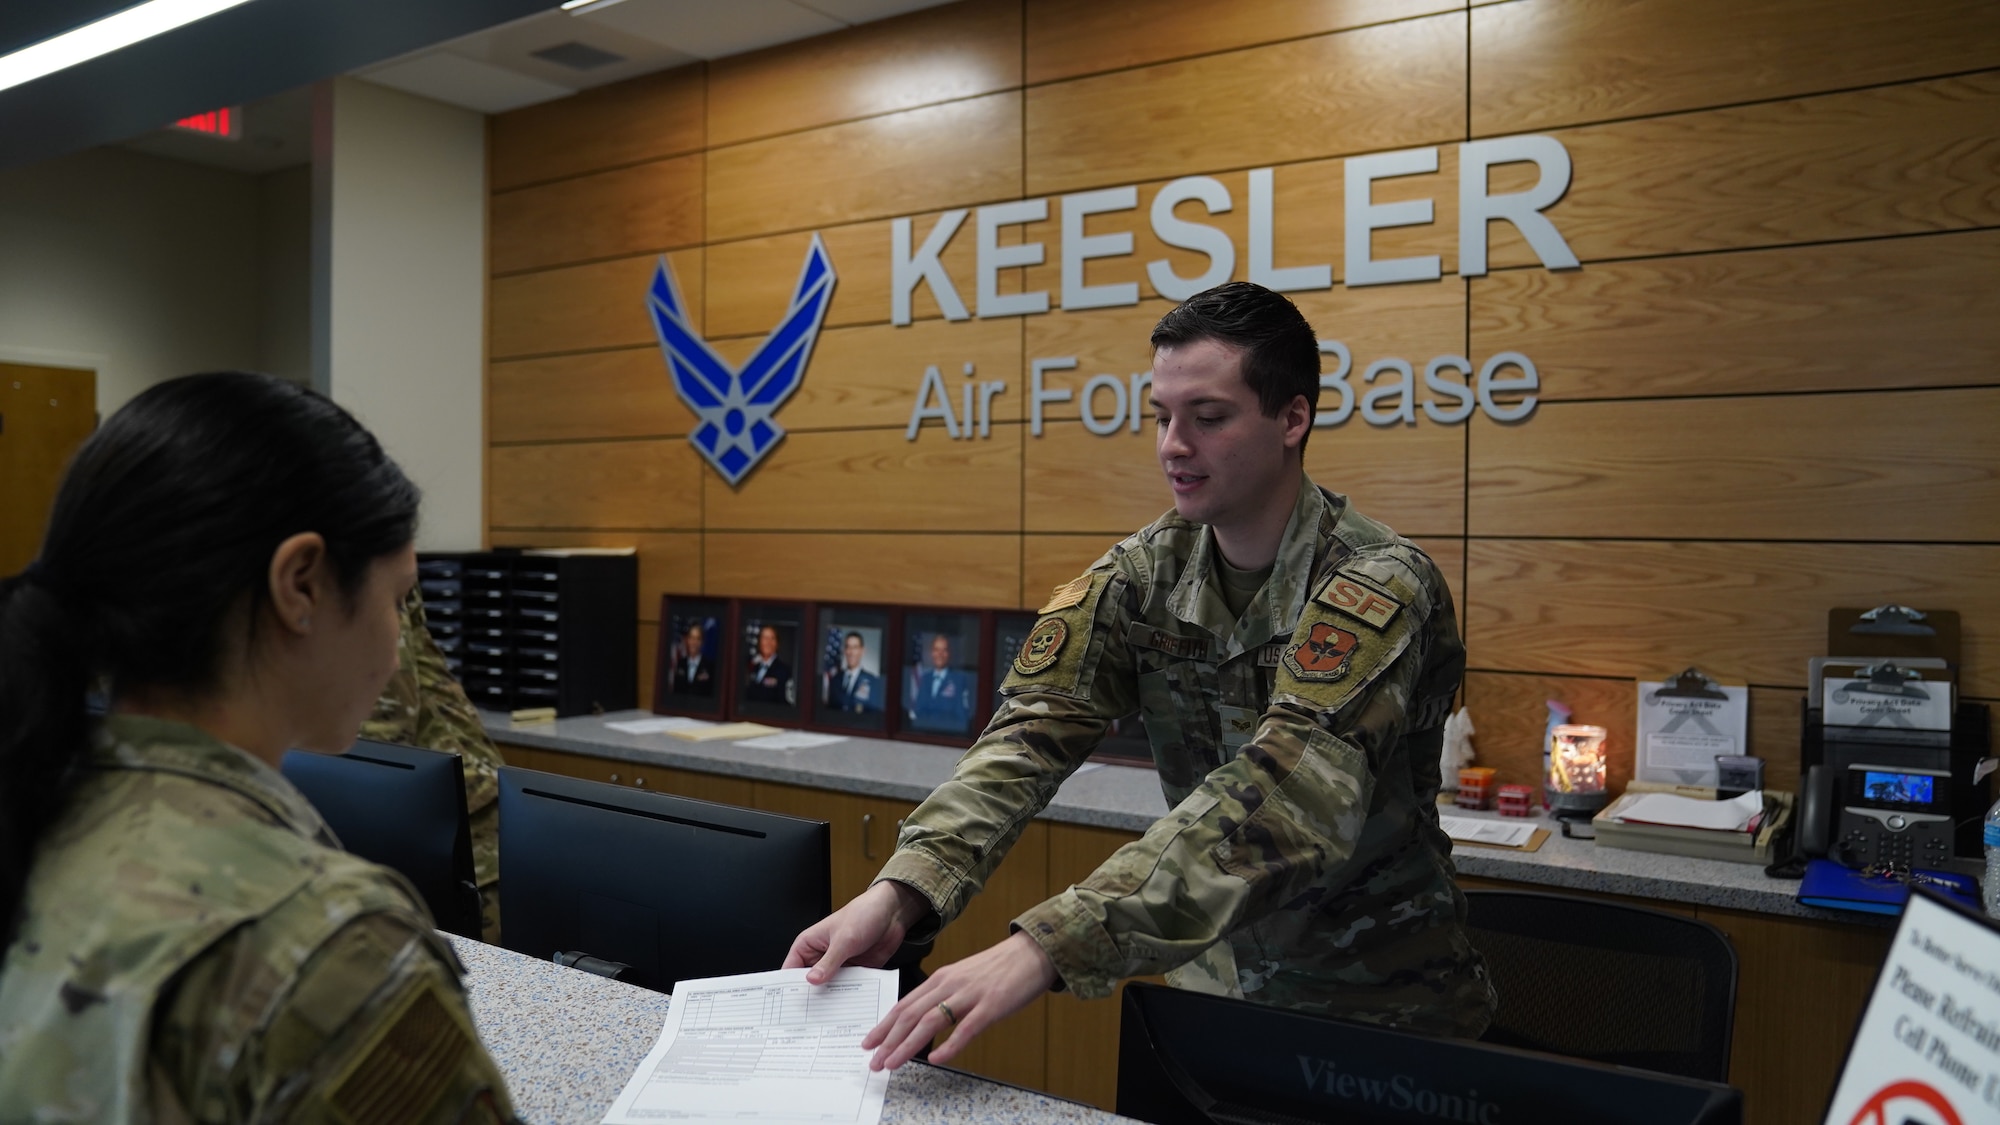 U.S. Air Force Senior Airman Daniel Griffith, 81st Security Forces Squadron defender, hands 2d Lt. Kristina Dean, 81st Training Wing public affairs officer, a form at the Division Street Gate Visitor’s Center on Keesler Air Force Base, Mississippi, March 9, 2023.